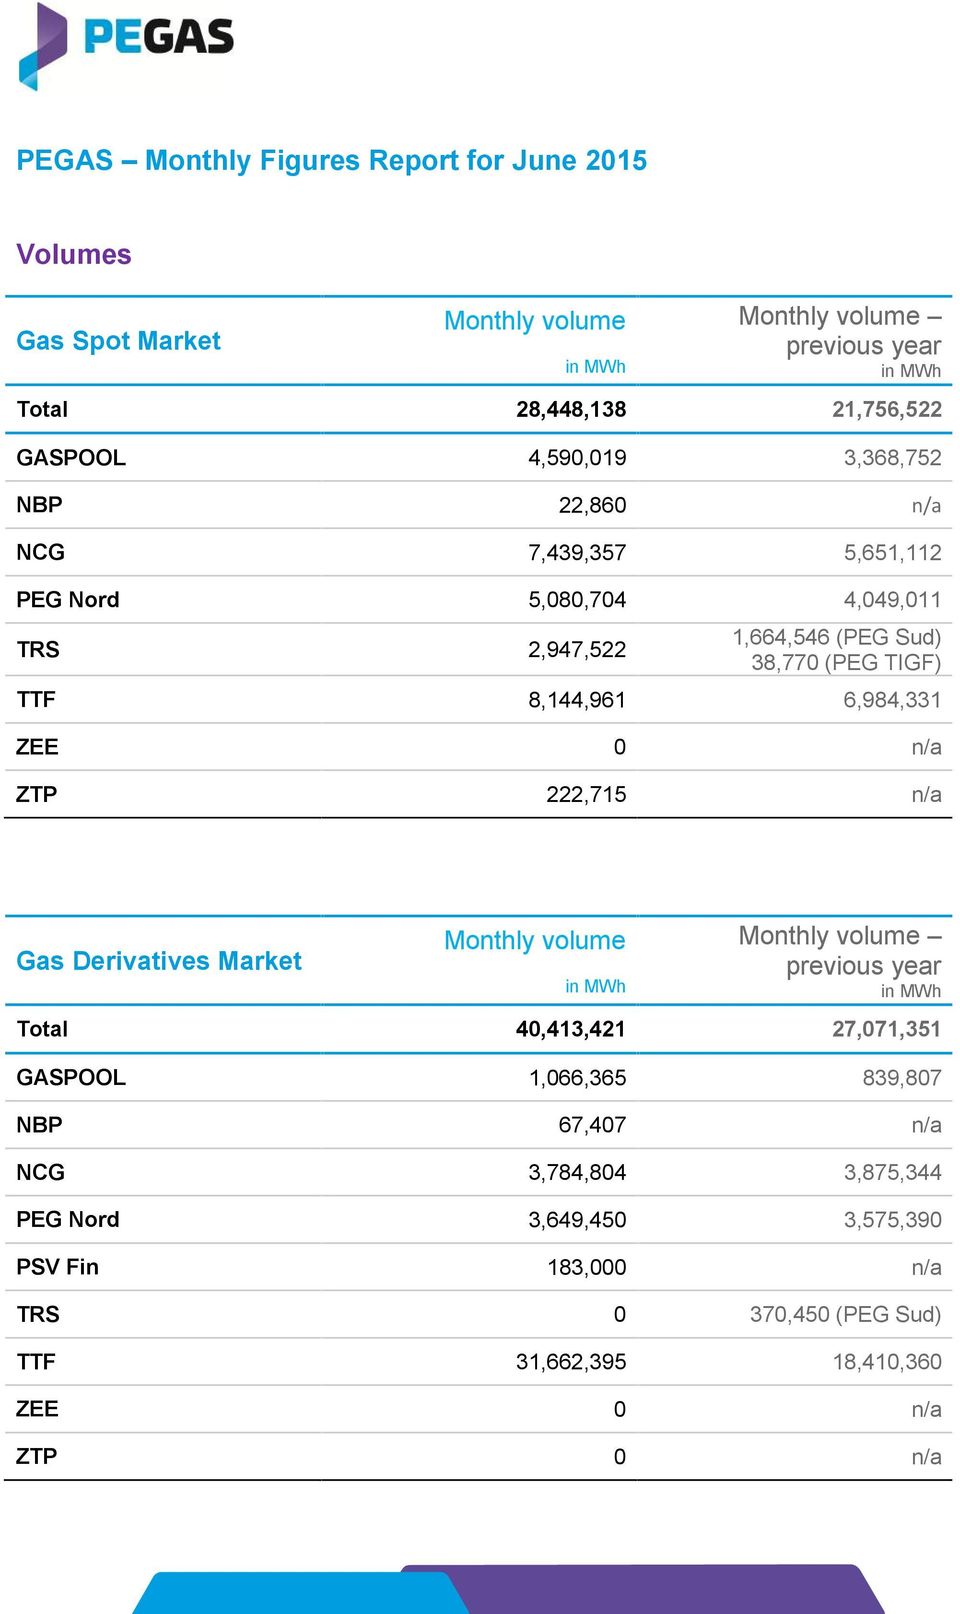 6,984,331 ZEE 0 n/a ZTP 222,715 n/a Gas Derivatives Market Monthly volume Monthly volume previous year Total 40,413,421 27,071,351 GASPOOL 1,066,365